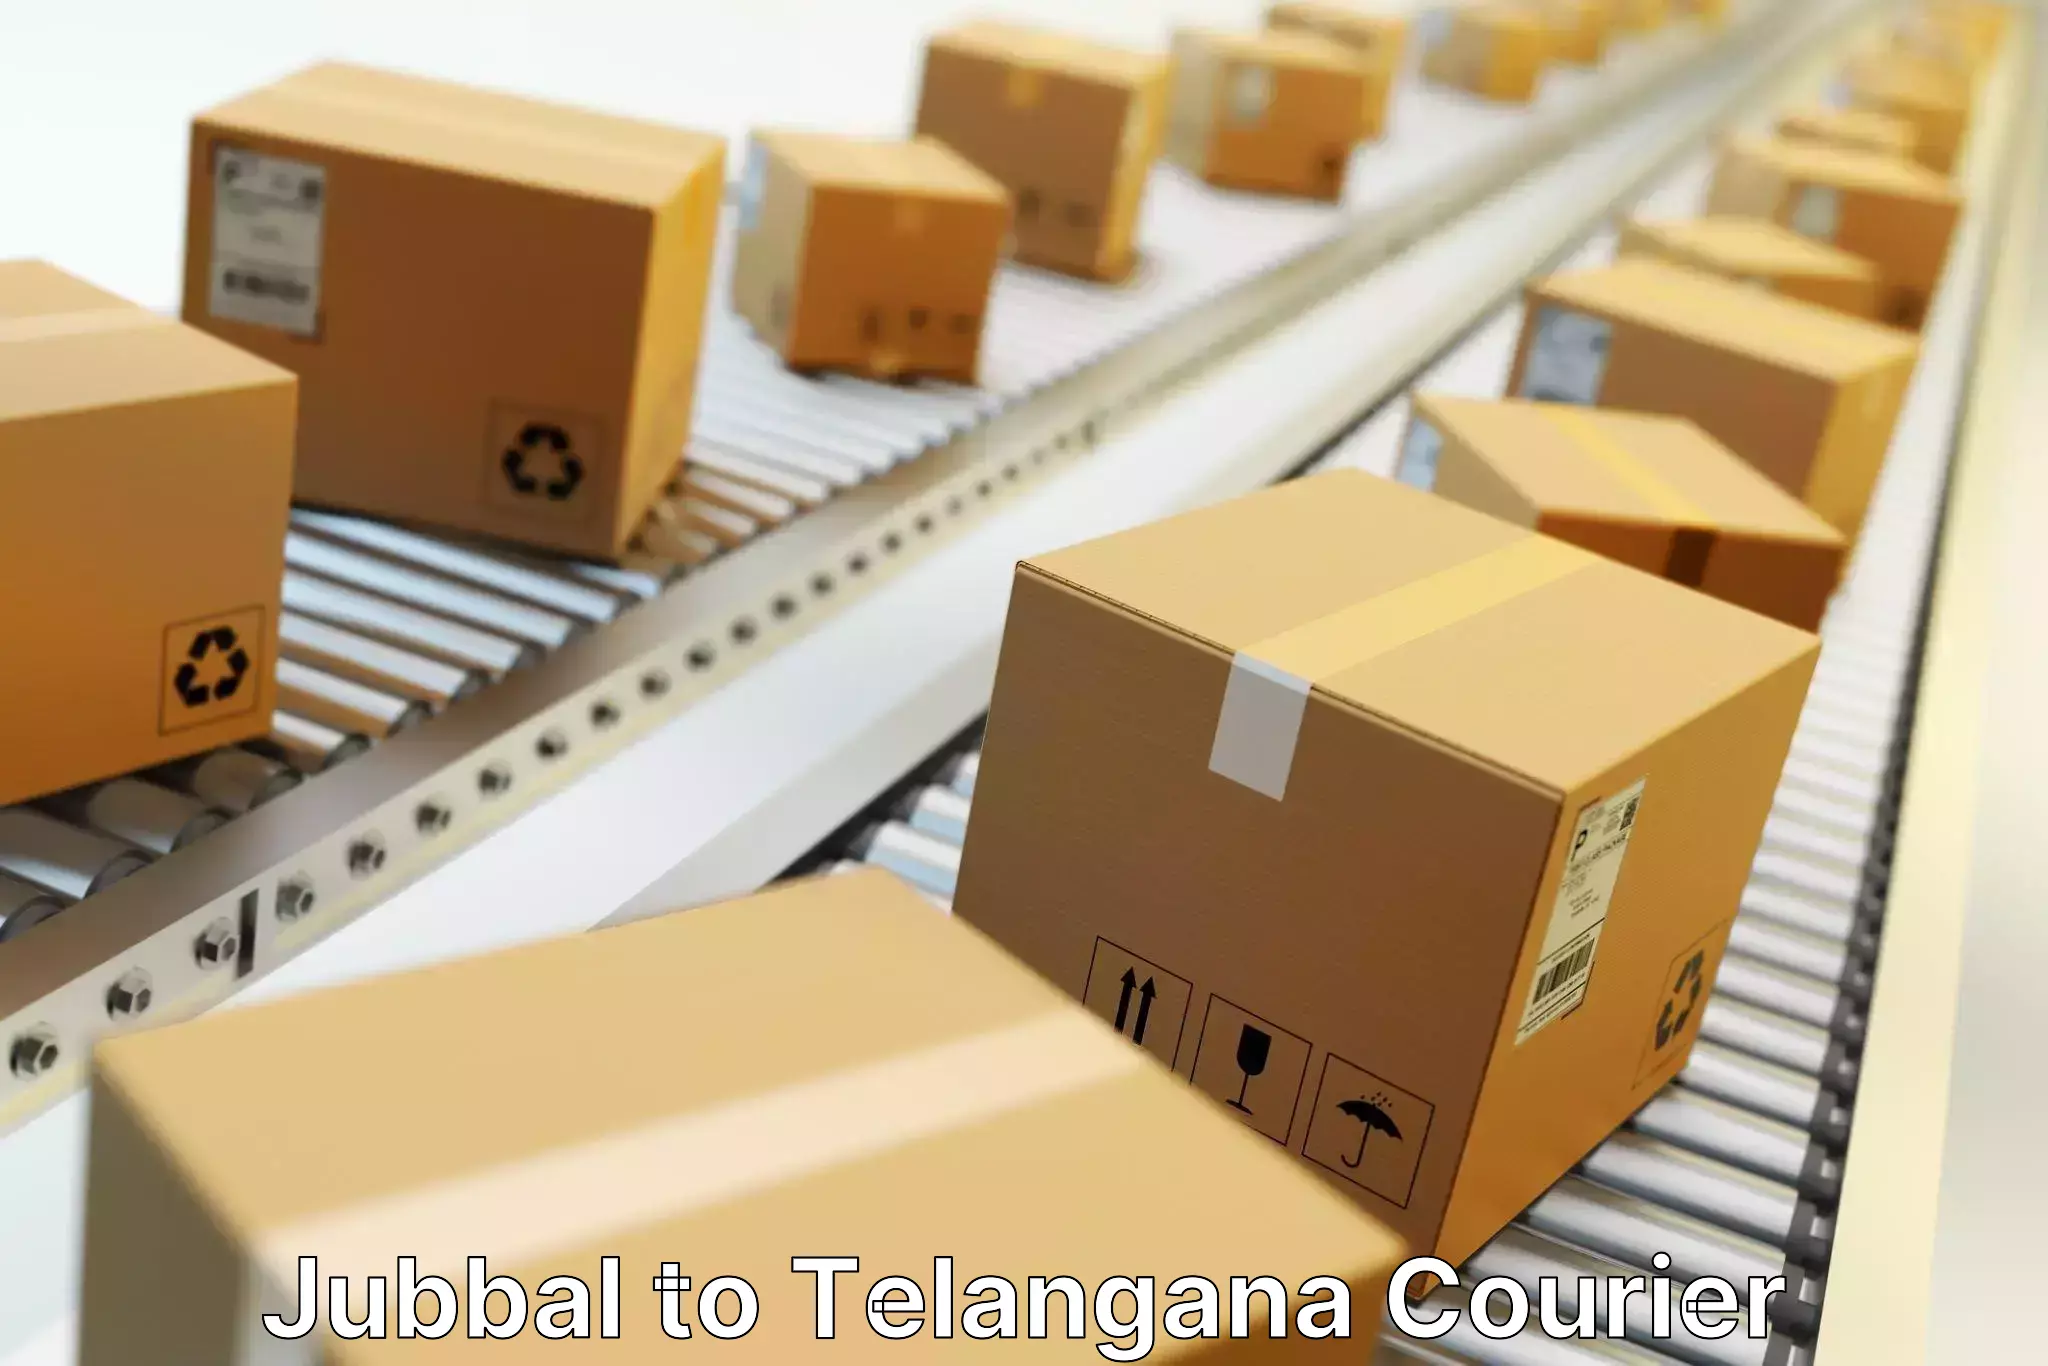 Same-day delivery solutions in Jubbal to Telangana